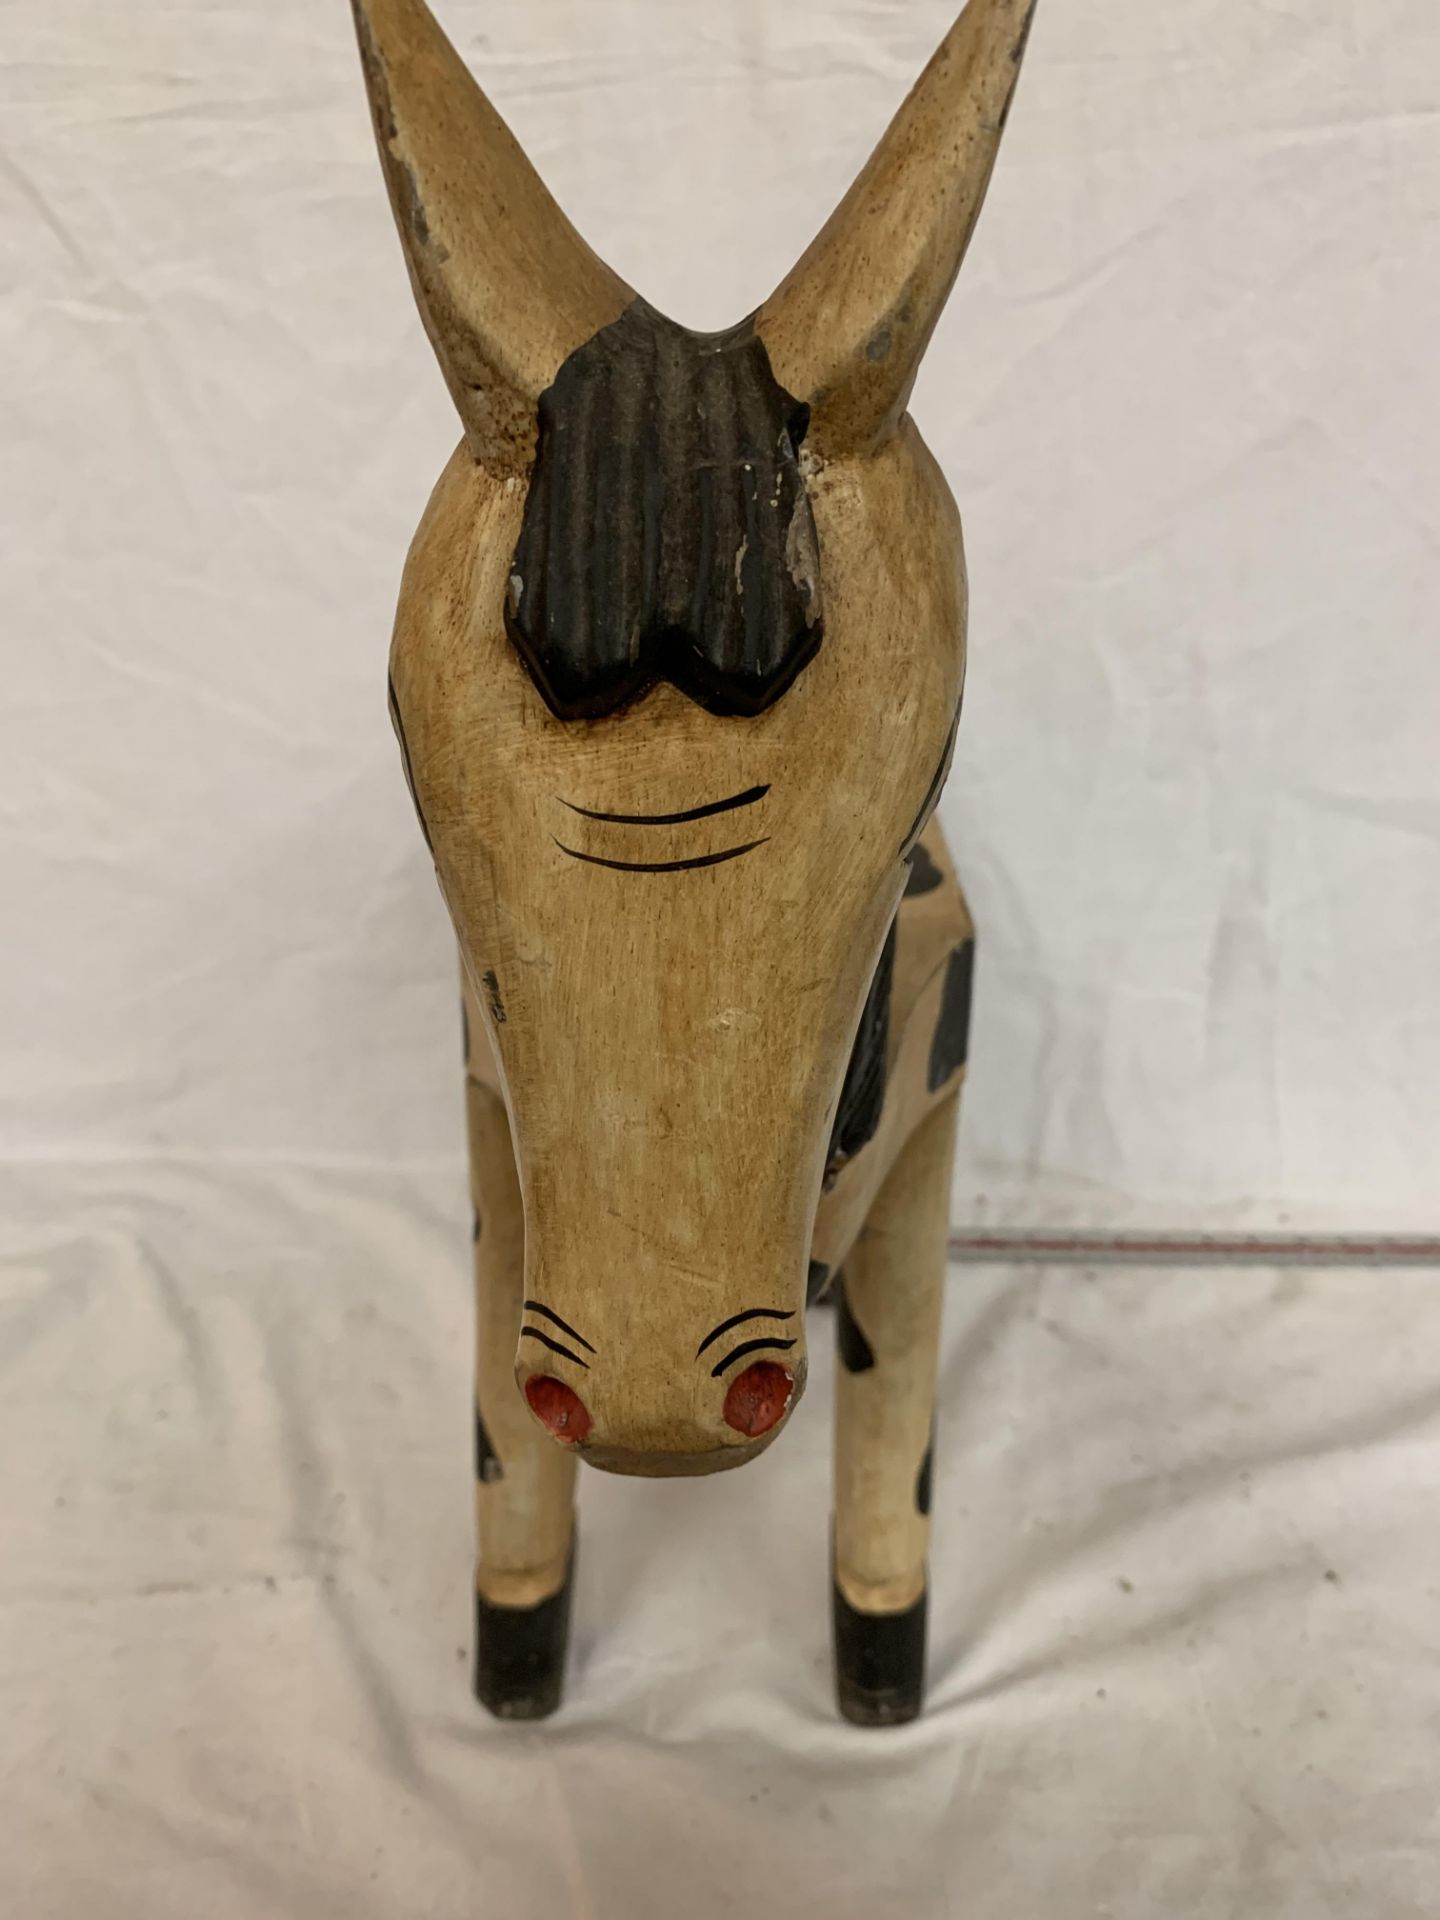 A WOODEN STOOL IN THE FORM OF A HORSE PAINTED IN THE STYLE OF AN APPALOOSA - Image 4 of 6